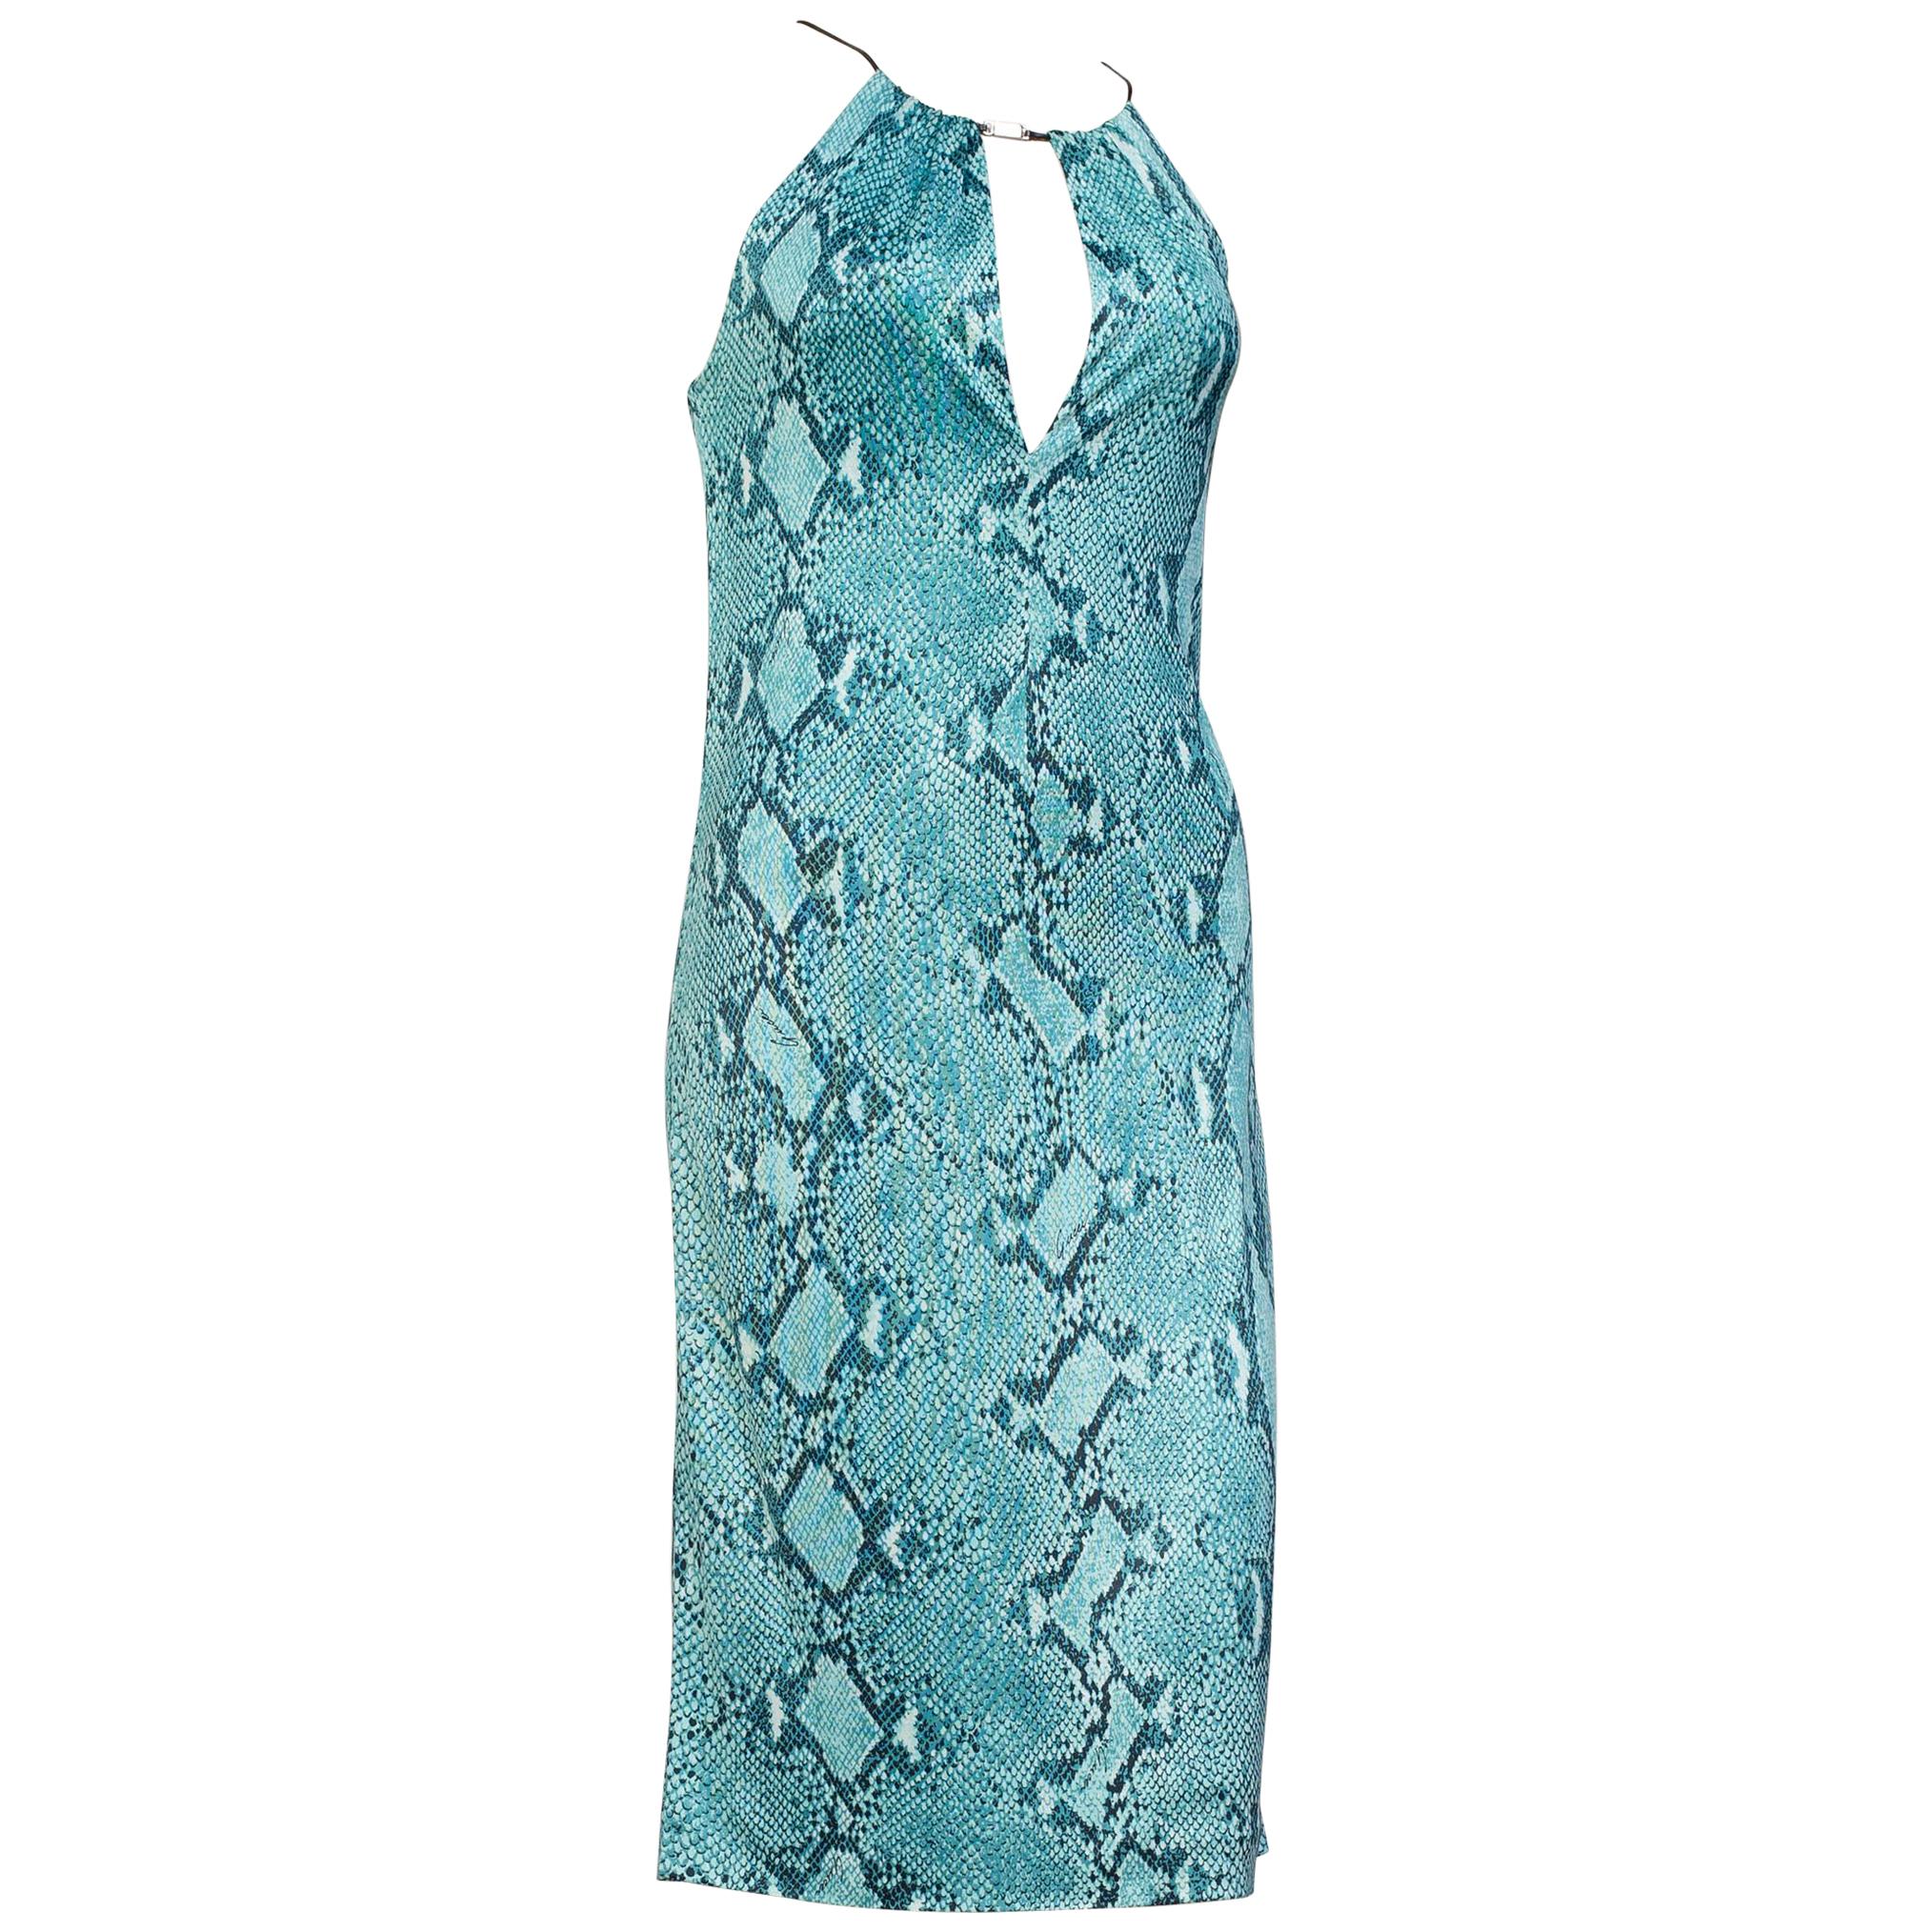 1990S Tom Ford GUCCI Iconic Teal Jersey Snake Print Dress For Sale